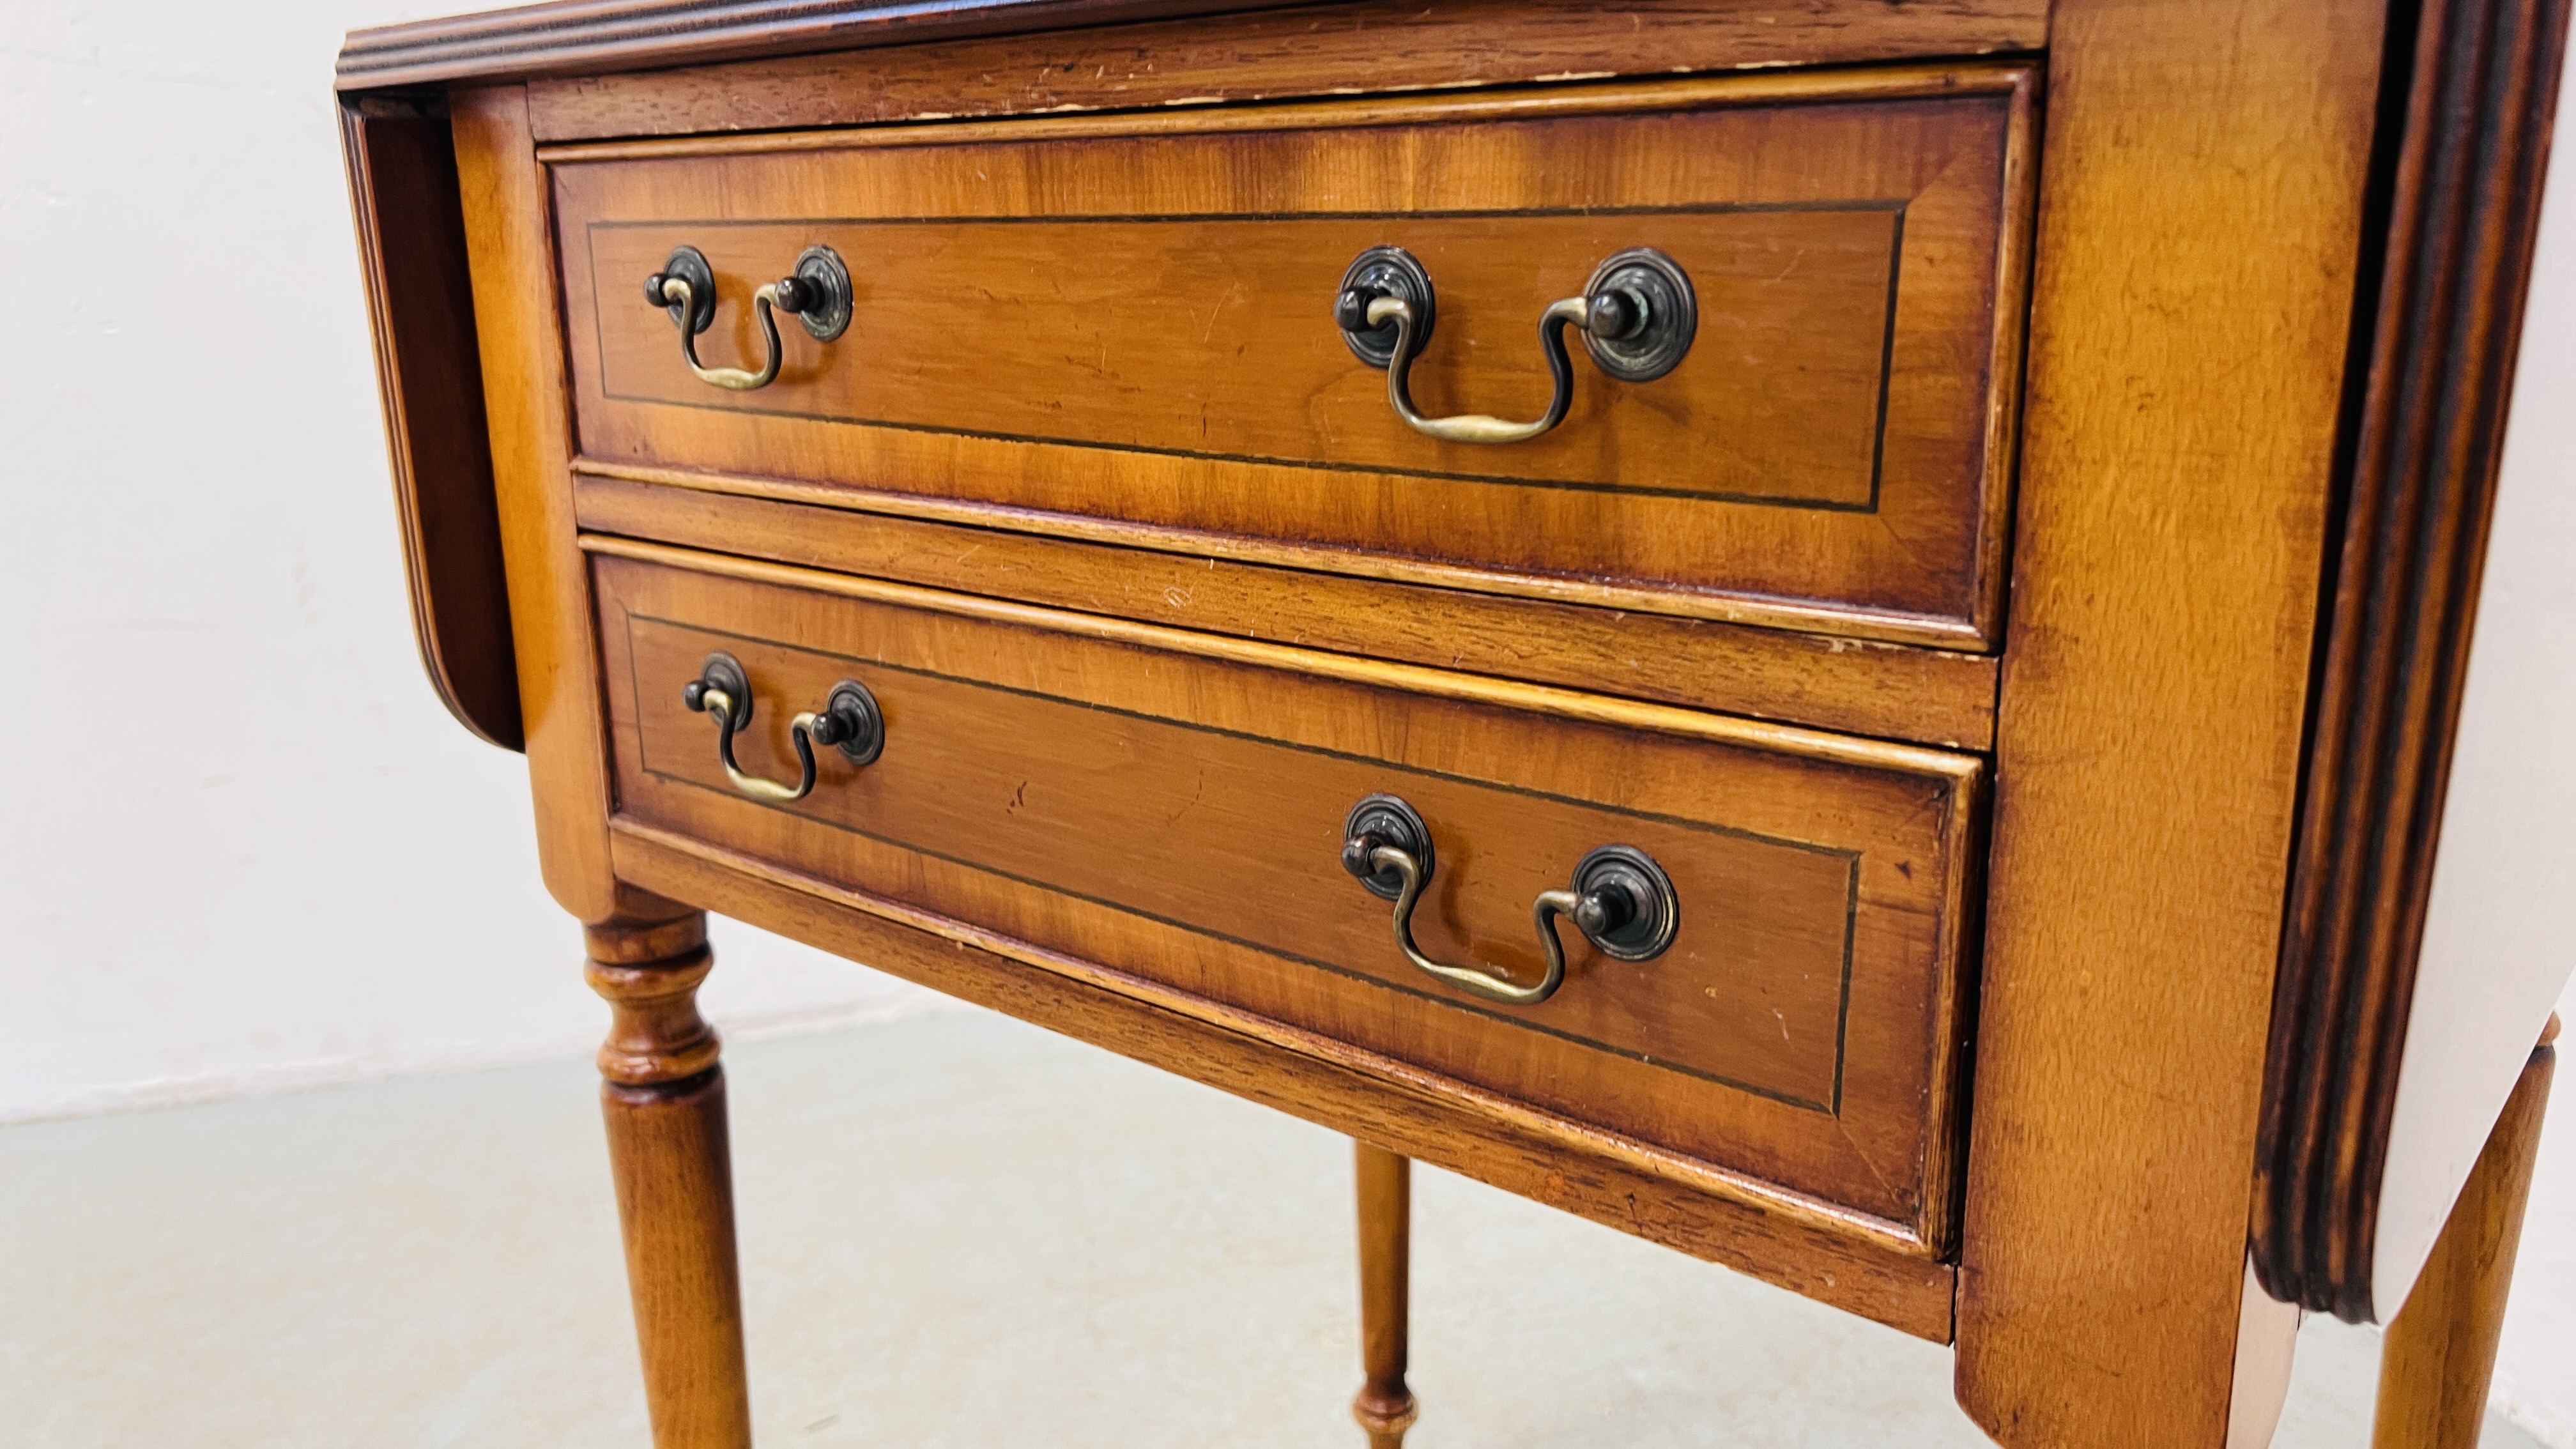 A REPRODUCTION YEW WOOD DROP LEAF OCCASIONAL TABLE WITH TWO FRIEZE DRAWERS. - Image 3 of 7